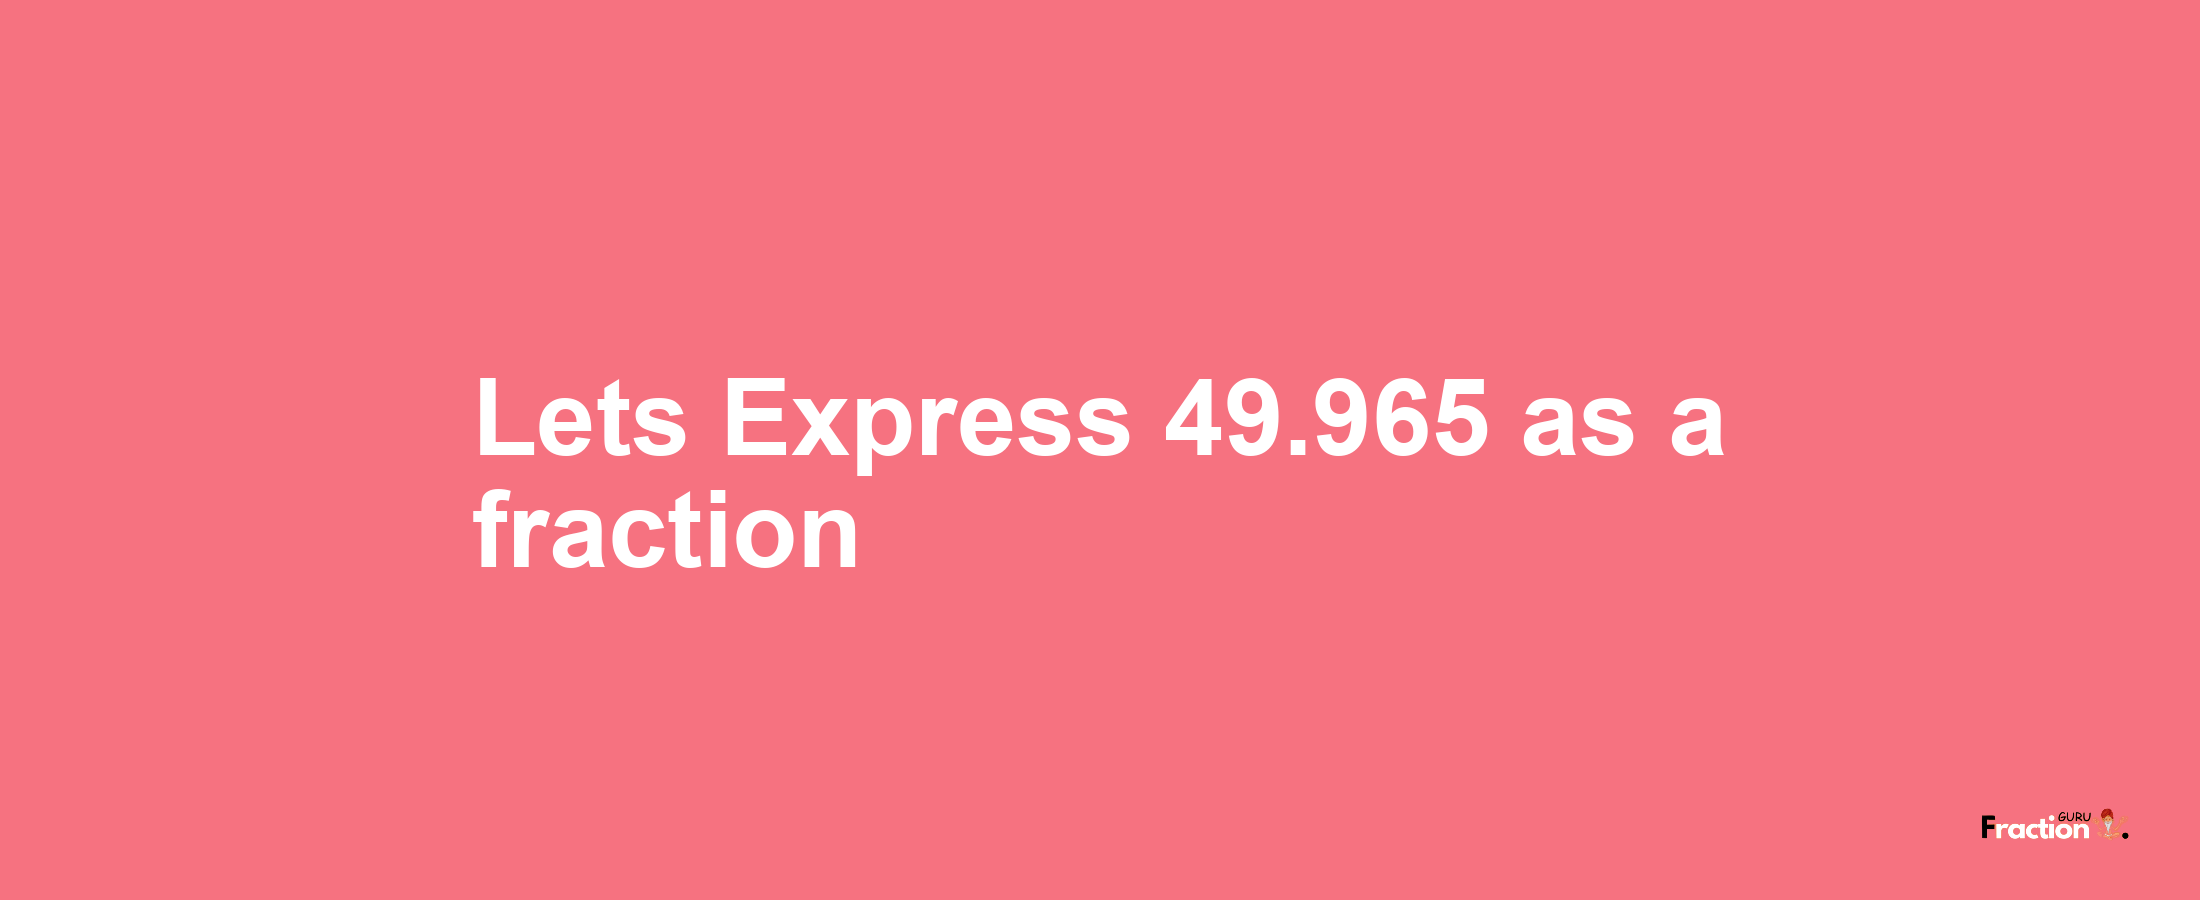 Lets Express 49.965 as afraction